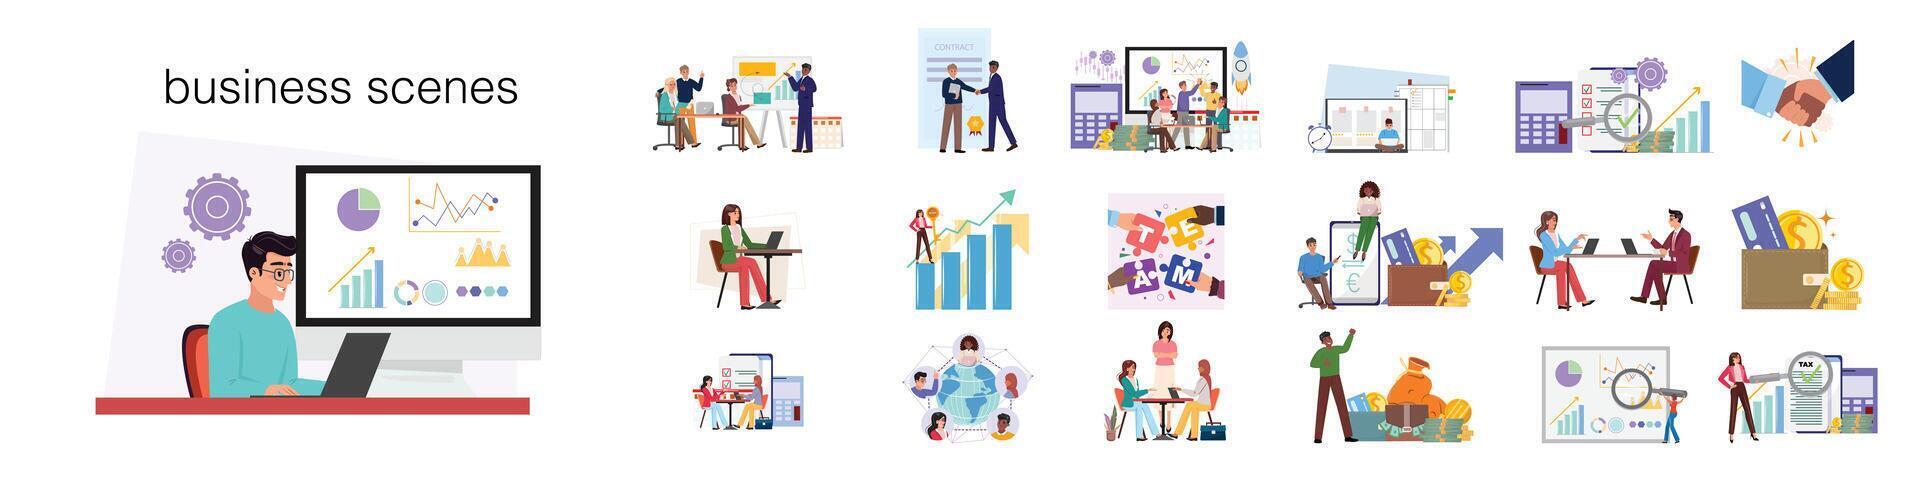 Business scenes with diverse people on white background vector